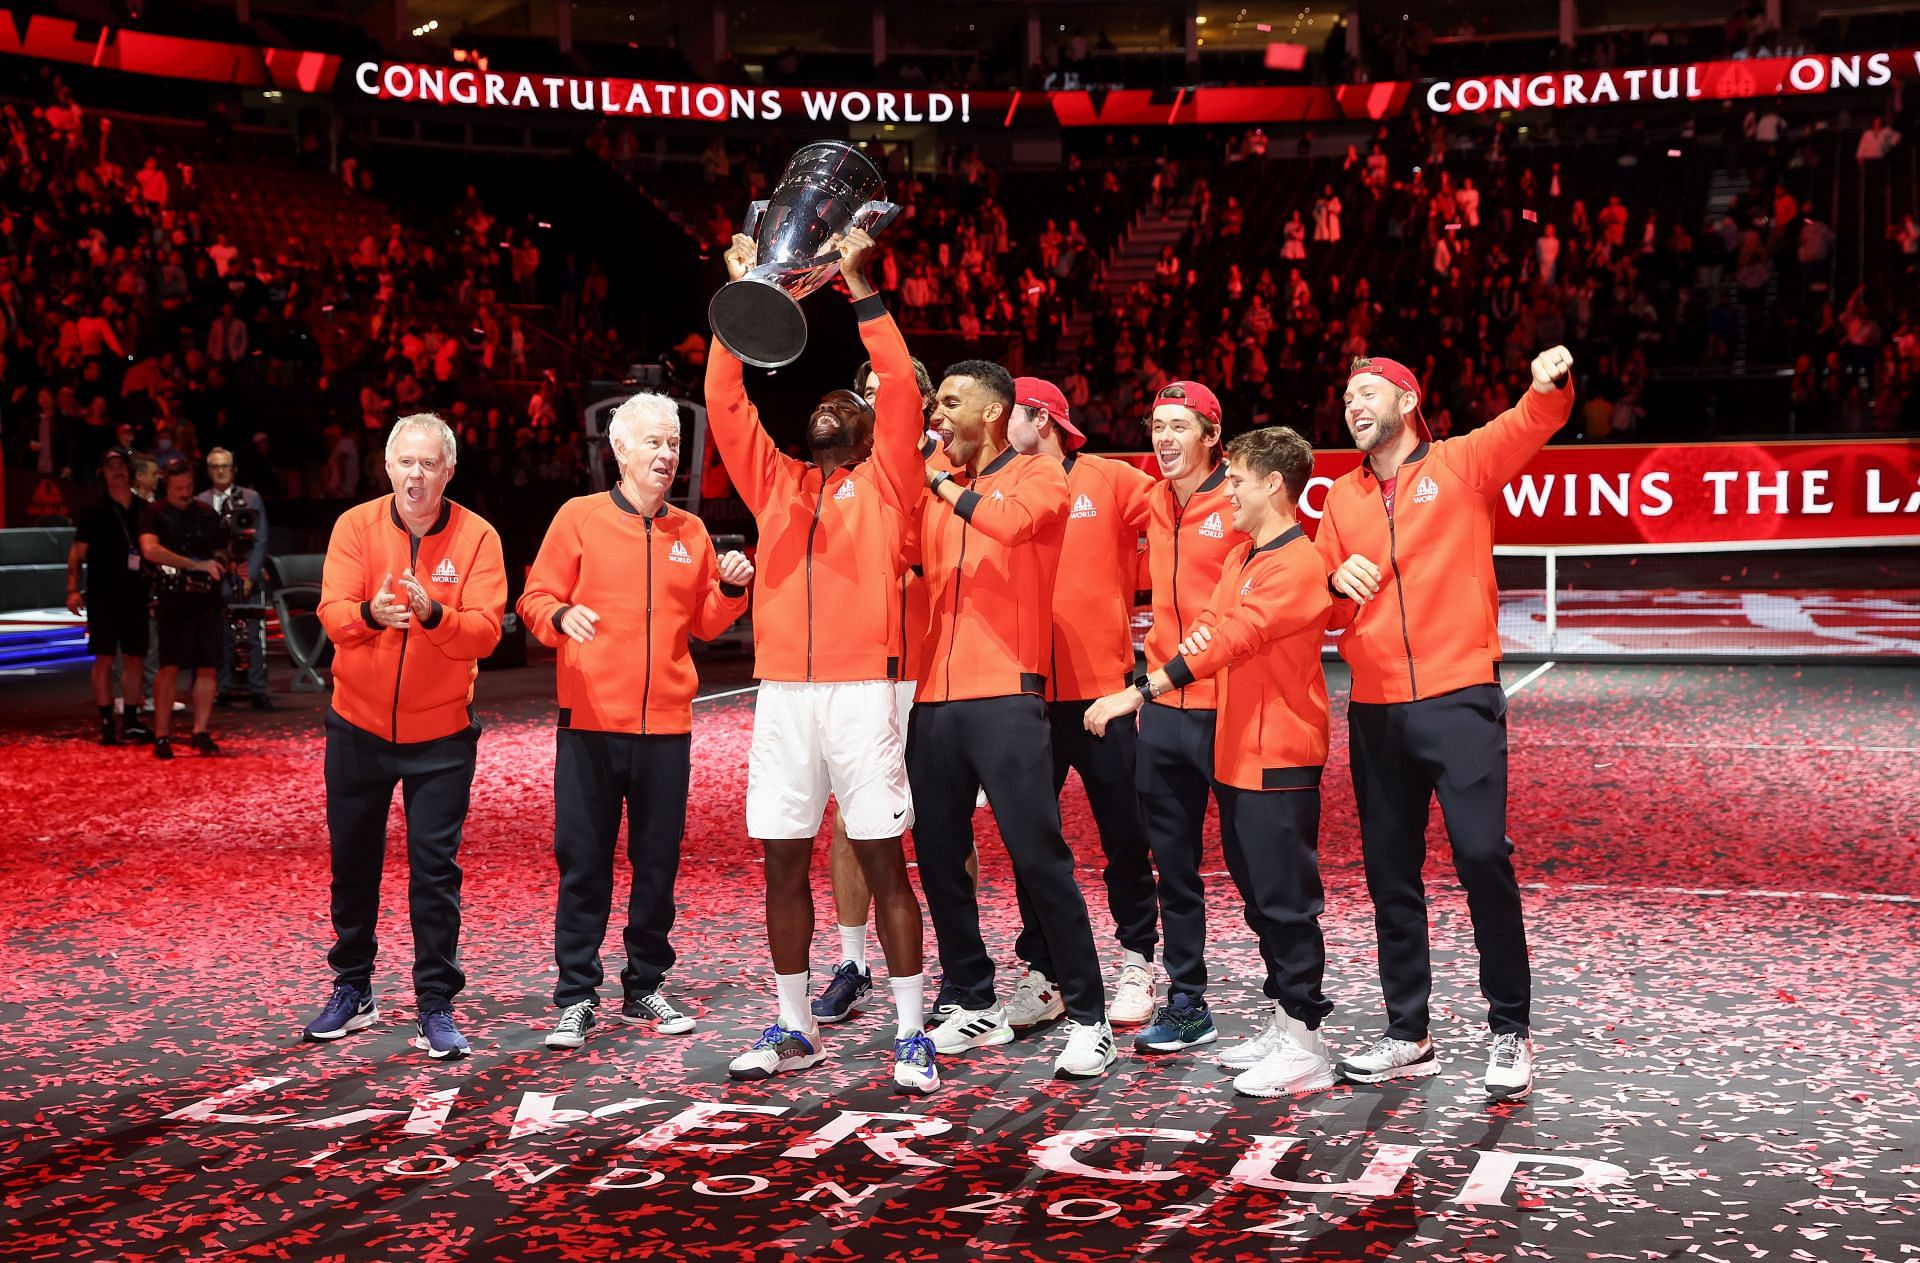 Frances Tiafoe hoists the Laver Cup trophy as Team World celebrates its maiden win at the tournament.